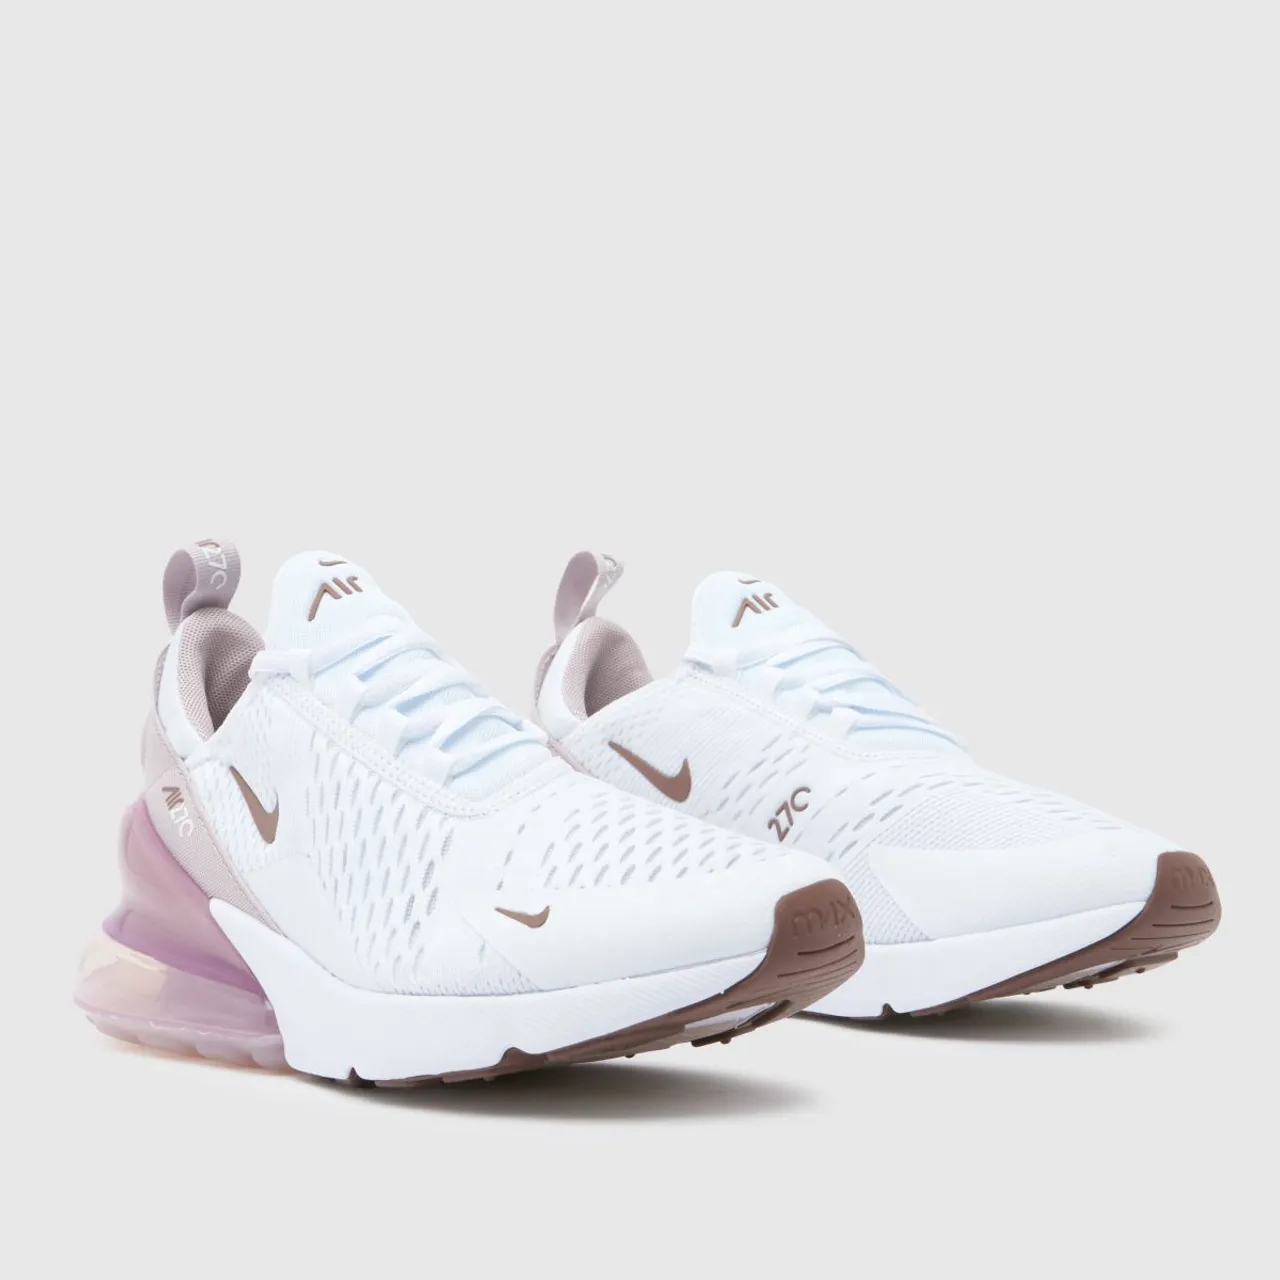 Nike air max 270 Trainers in White & Purple